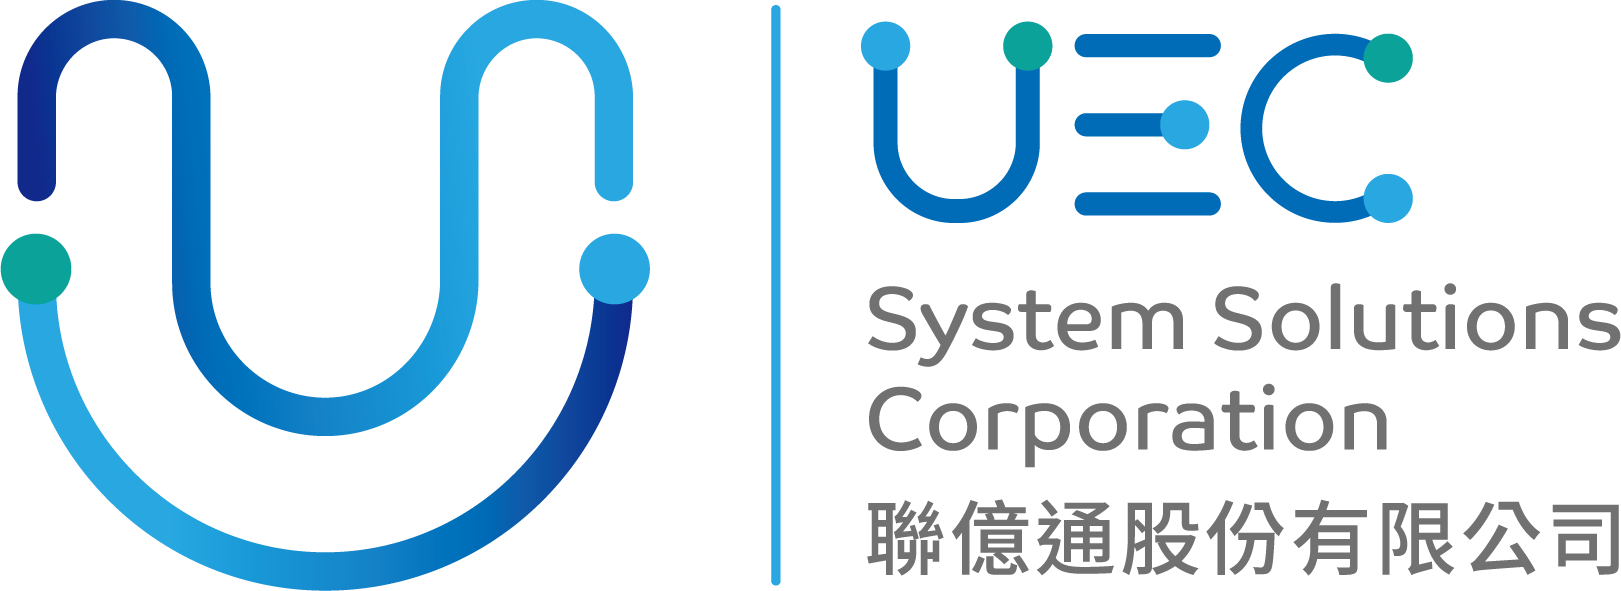 UEC-IoT System solutions corporation